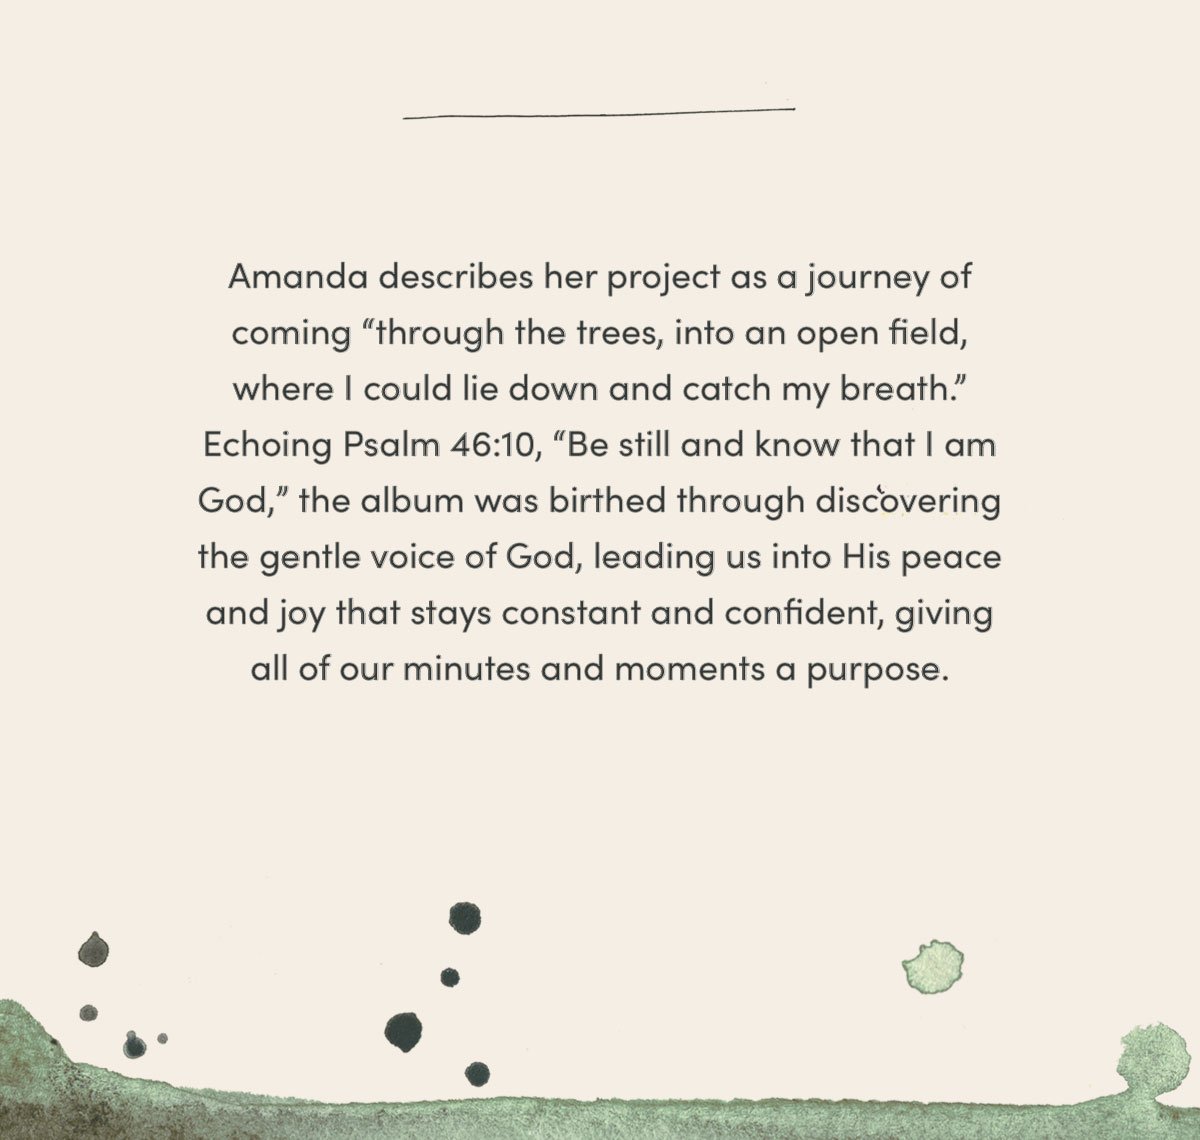 Amanda describes her project as a journey